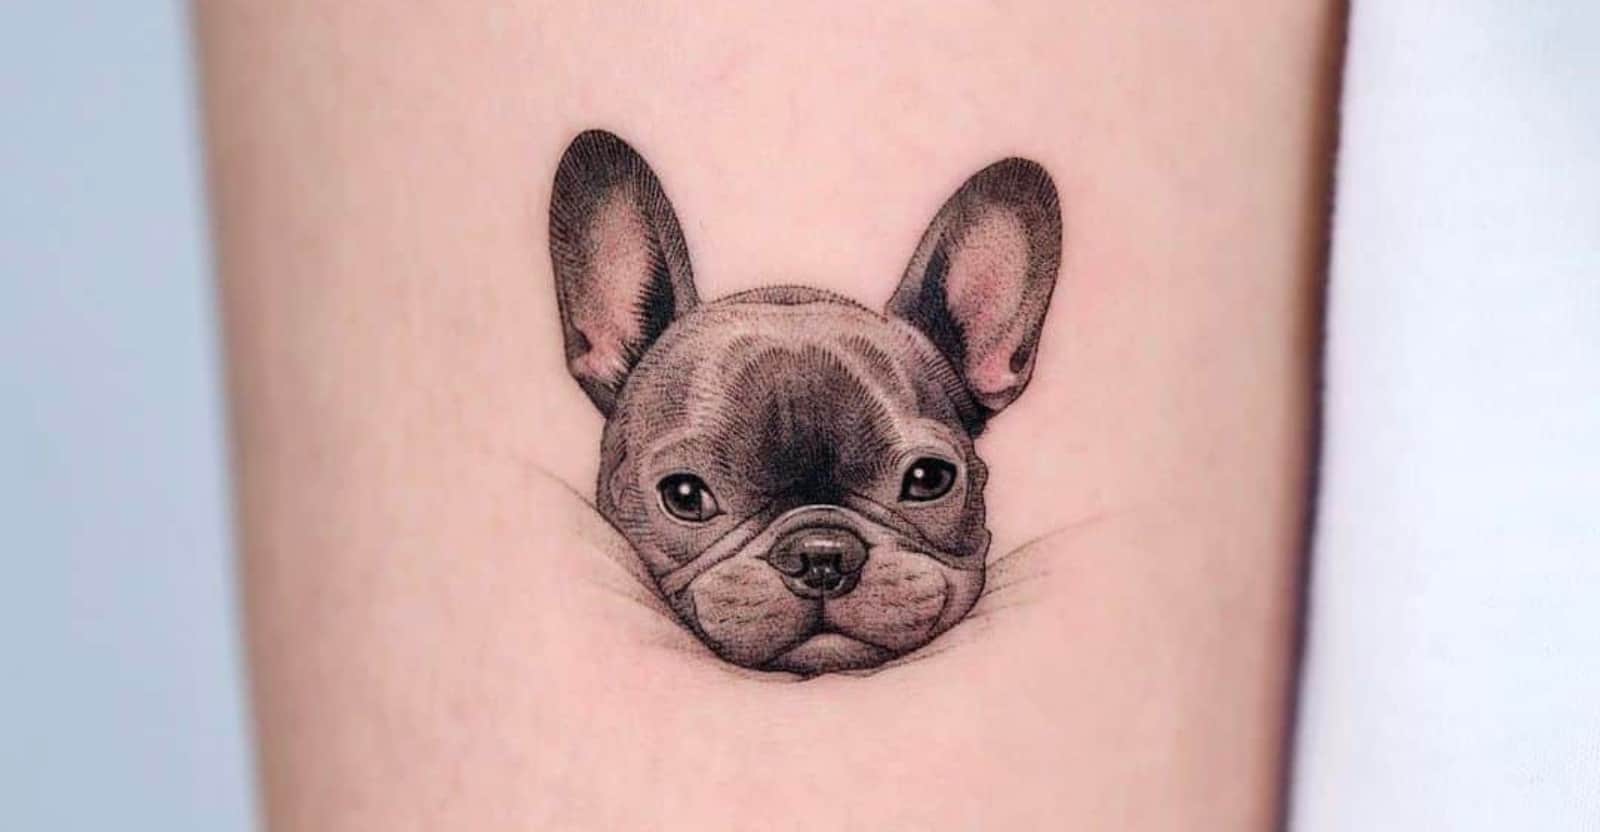 These Simple Tattoos Are Doggone Cute